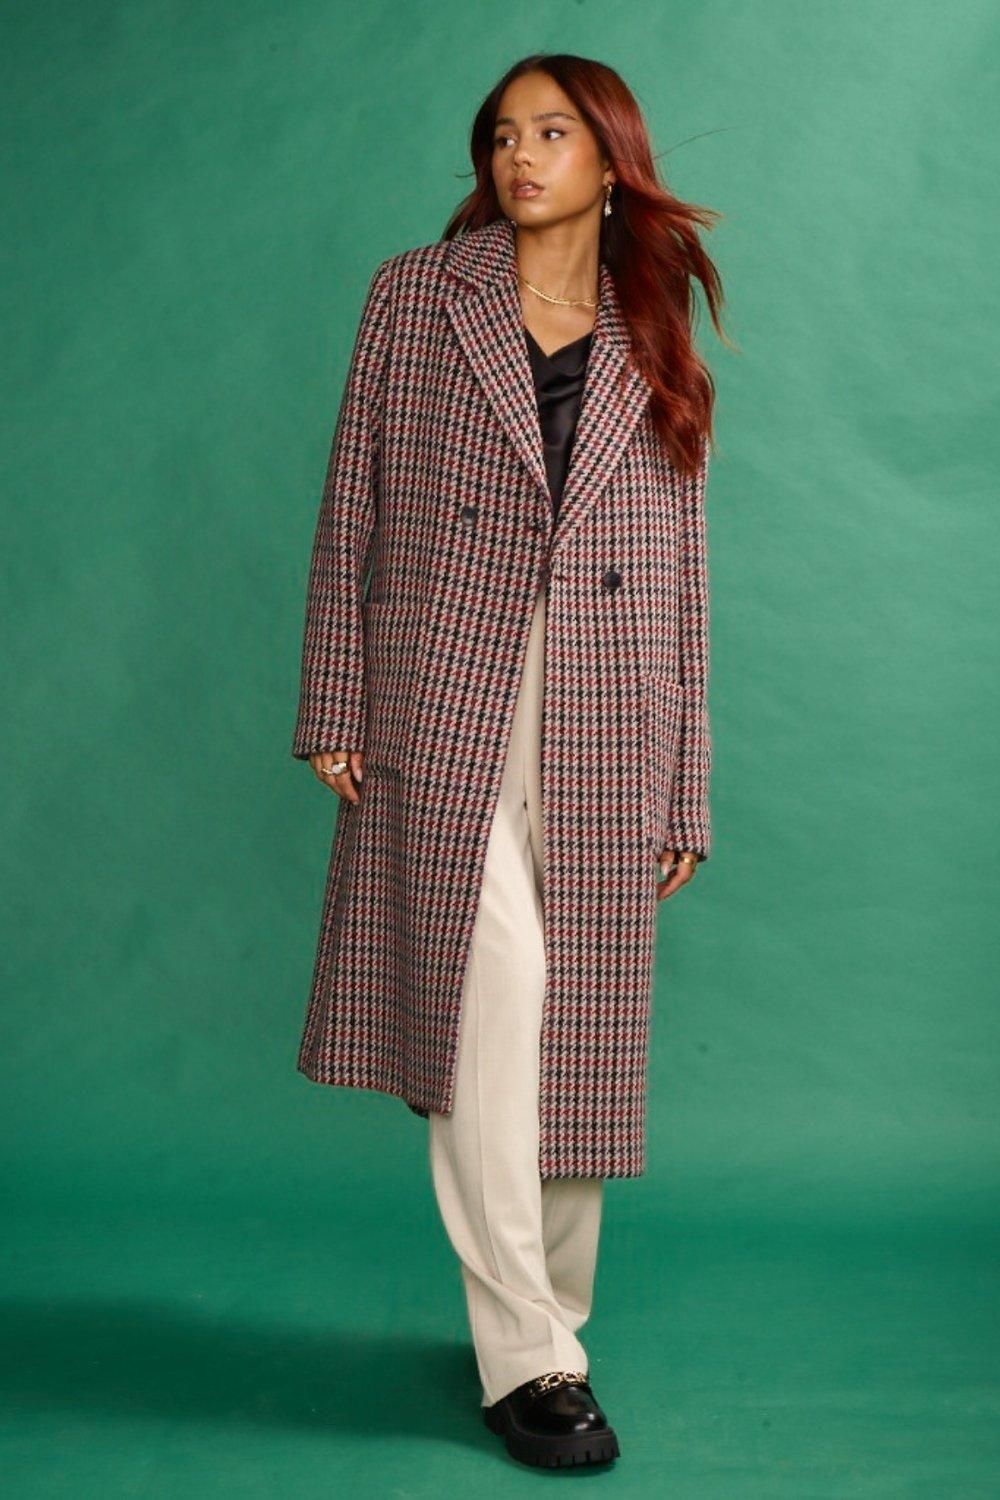 Jackets & Coats | Formal Coat In Heritage Check Wool Blend In Brown | ANOTHER SUNDAY | Debenhams UK